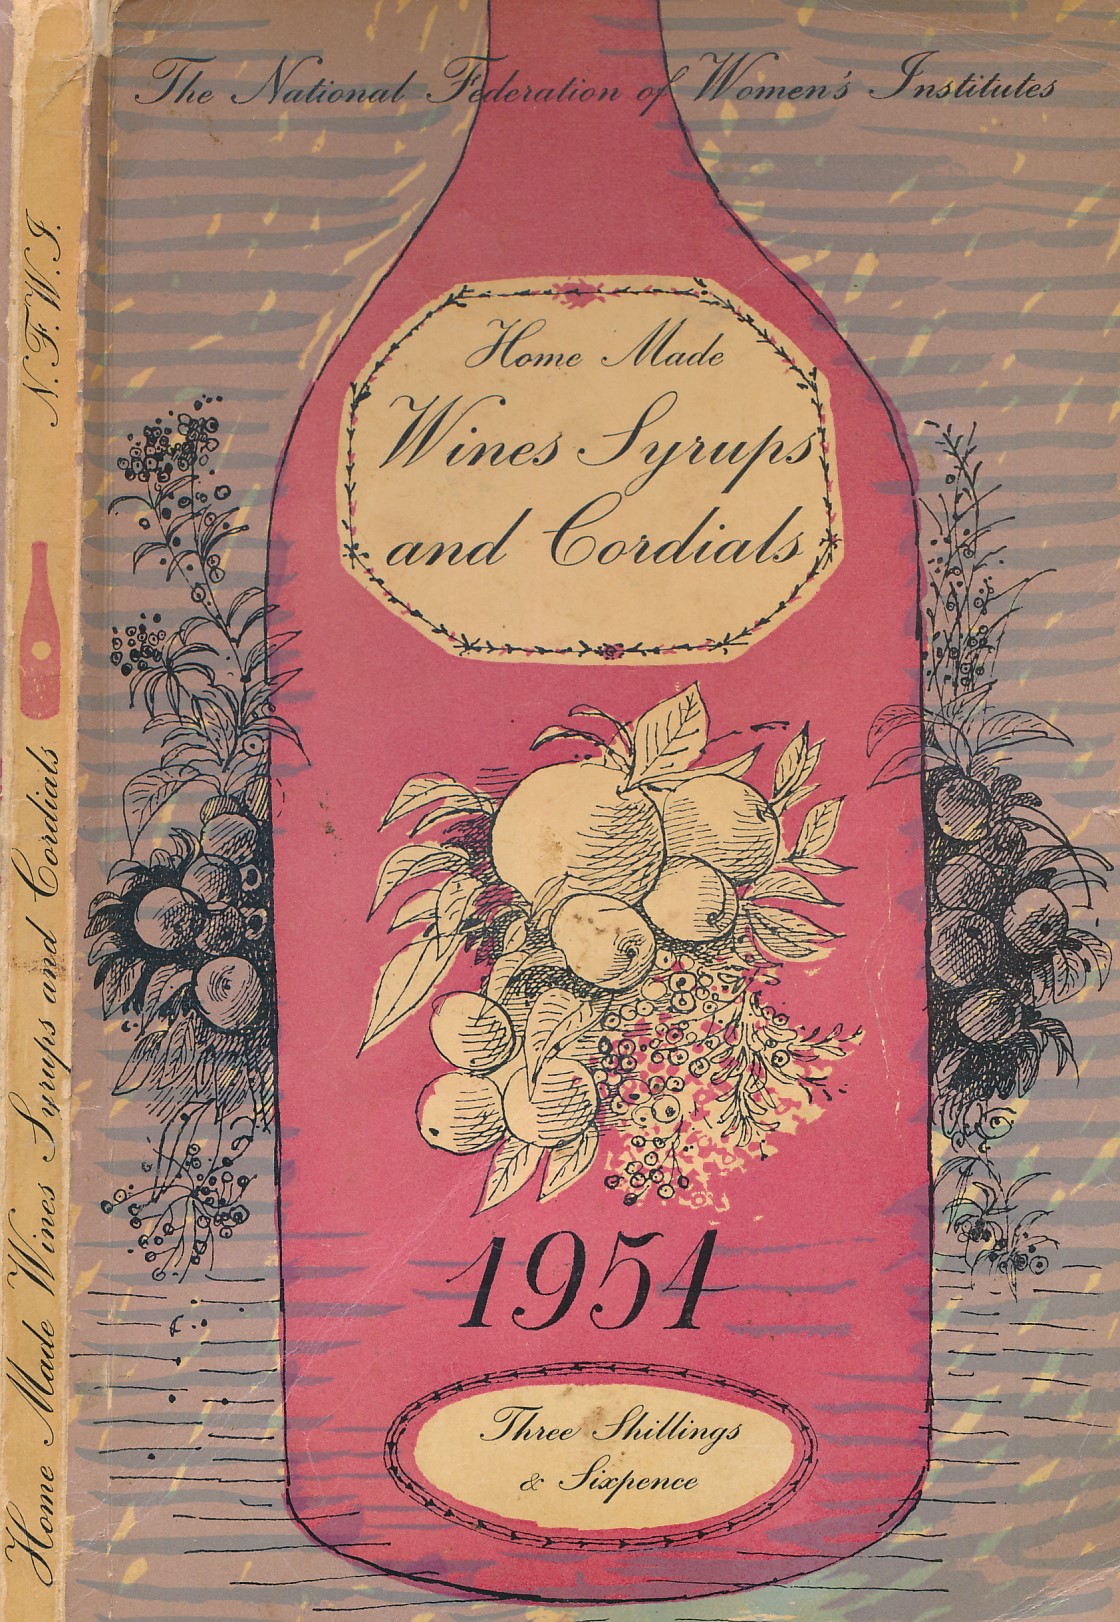 Home Made Wines Syrups and Cordials. Recipes of Women's Institute Members